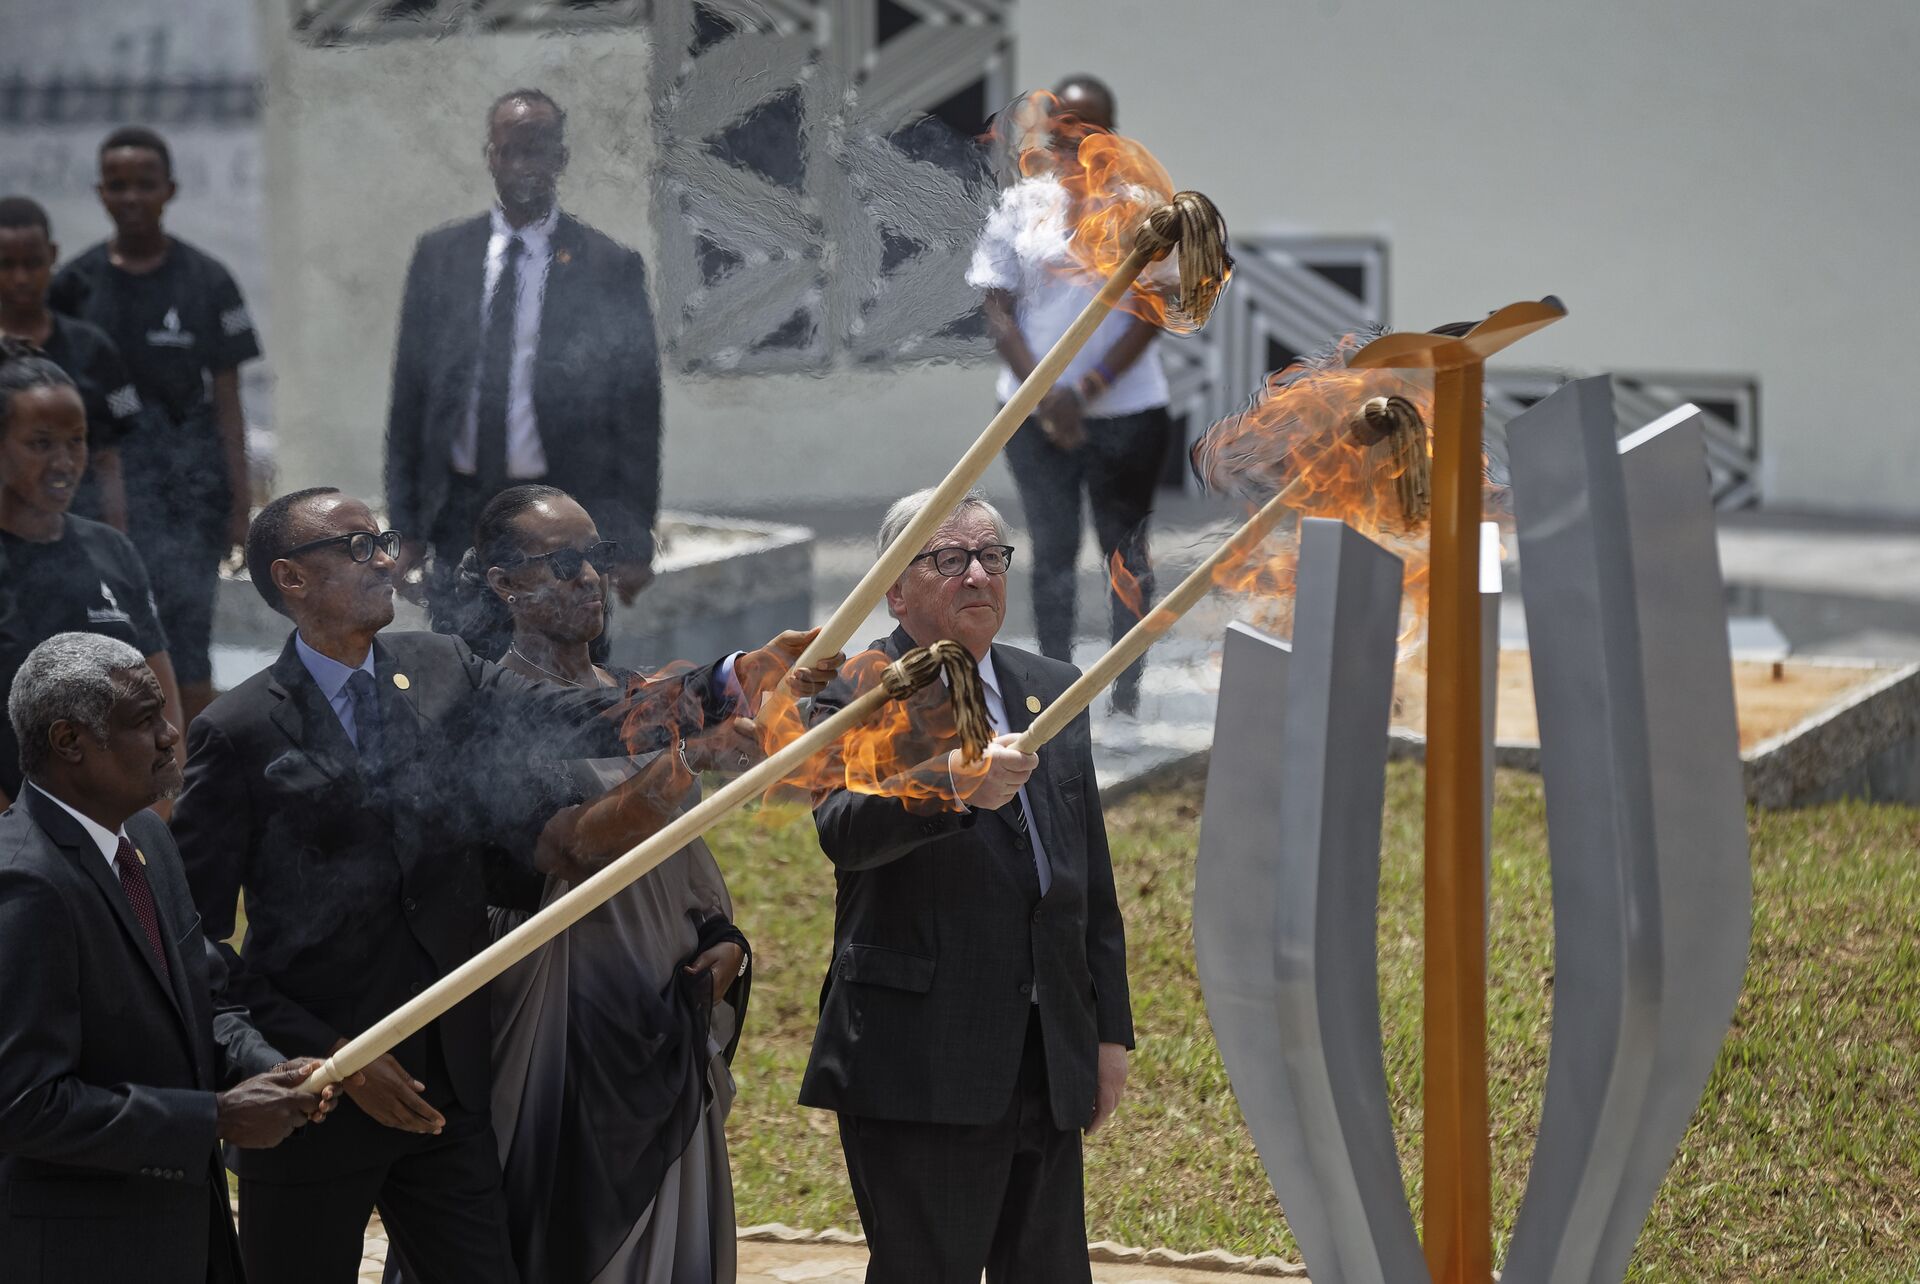 From left to right, Chairperson of the African Union Commission Moussa Faki Mahamat, Rwanda's President Paul Kagame, Rwanda's First Lady Jeannette Kagame, and President of the European Commission Jean-Claude Juncker, light the flame of remembrance at the Kigali Genocide Memorial in Kigali, Rwanda, Sunday, April 7, 2019.  - Sputnik International, 1920, 29.09.2022